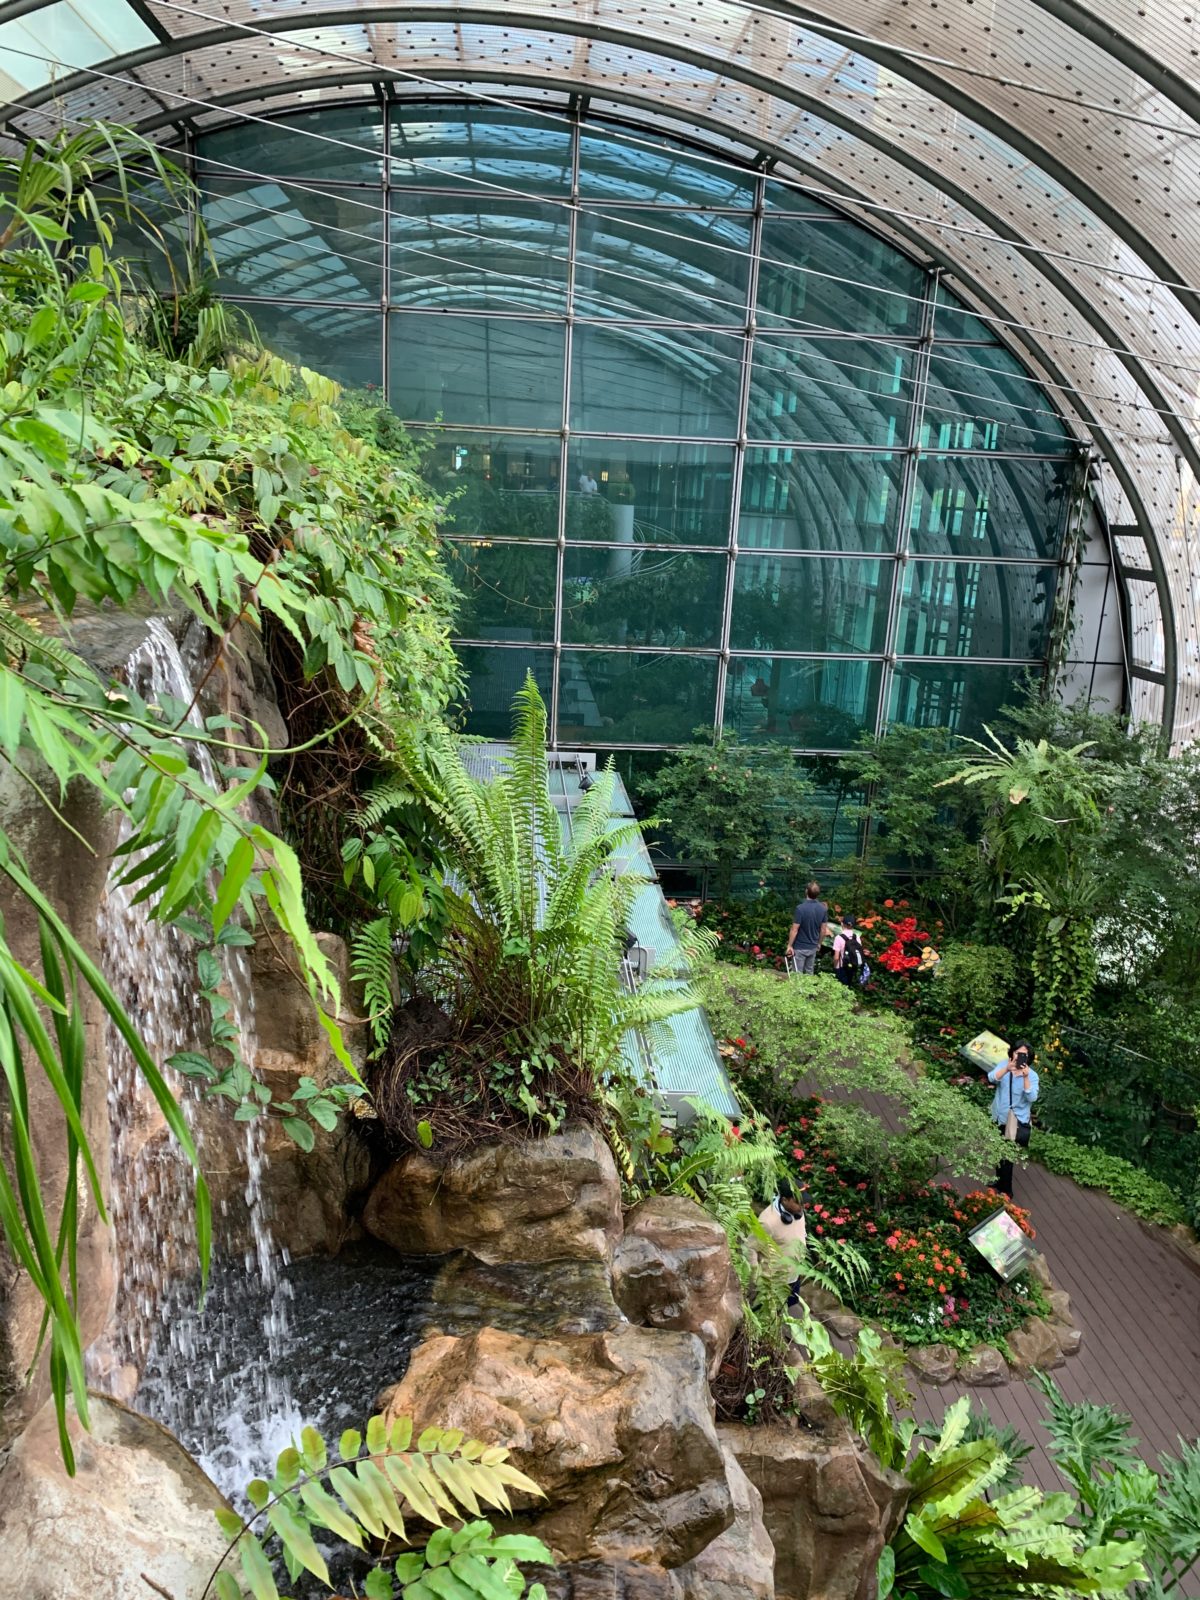 Visiting The Butterfly  Garden  At Changi  International  